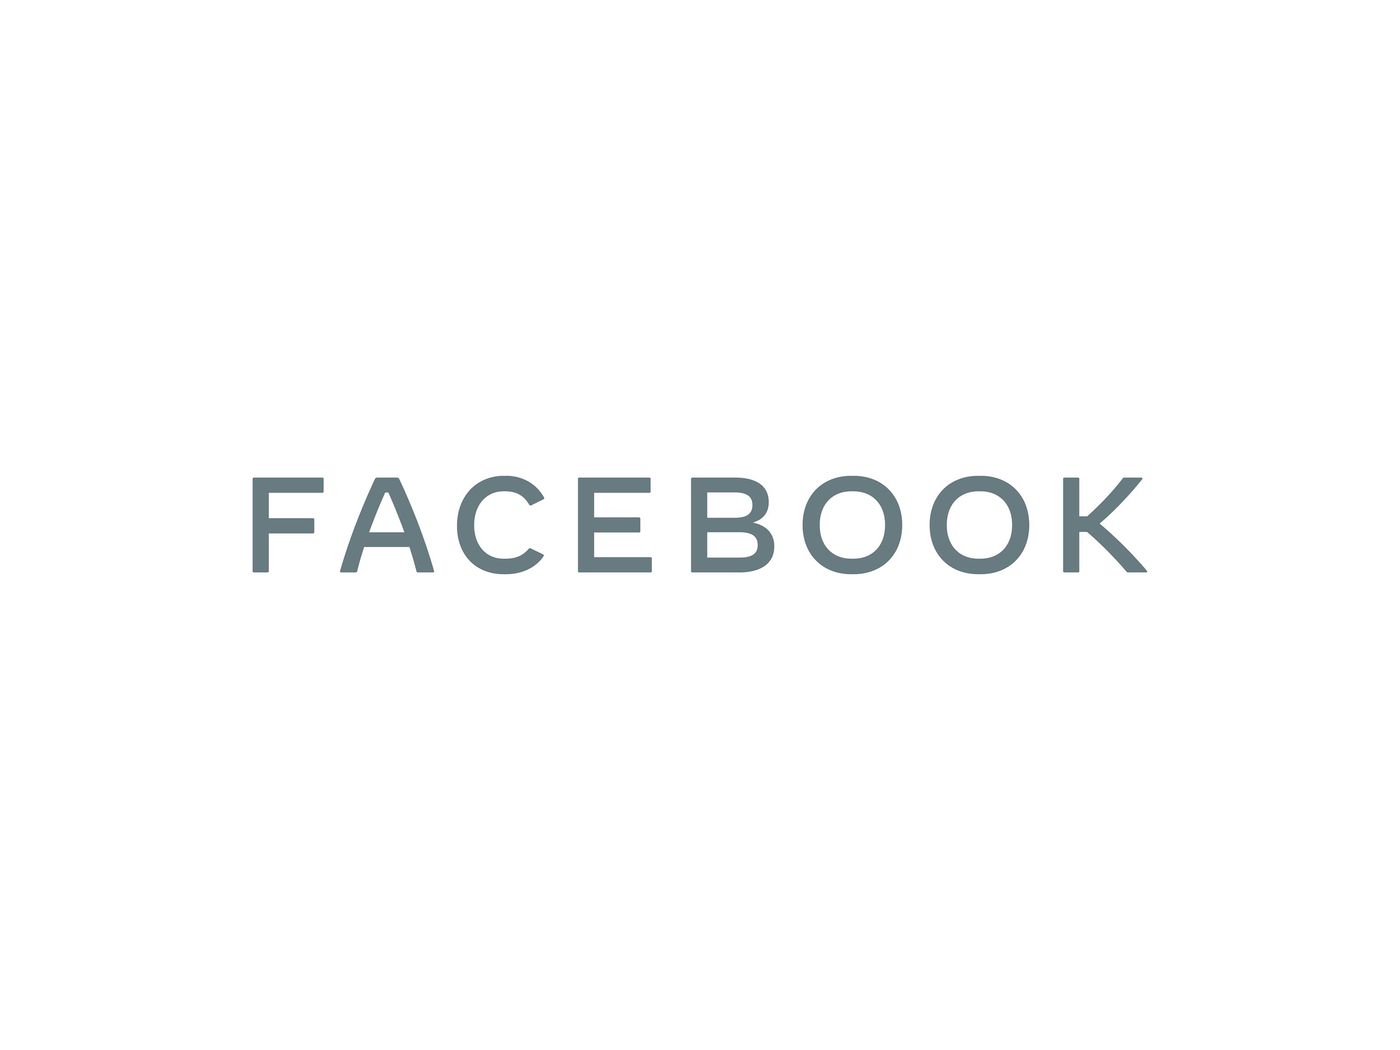 Facebook's new logo design is really generic